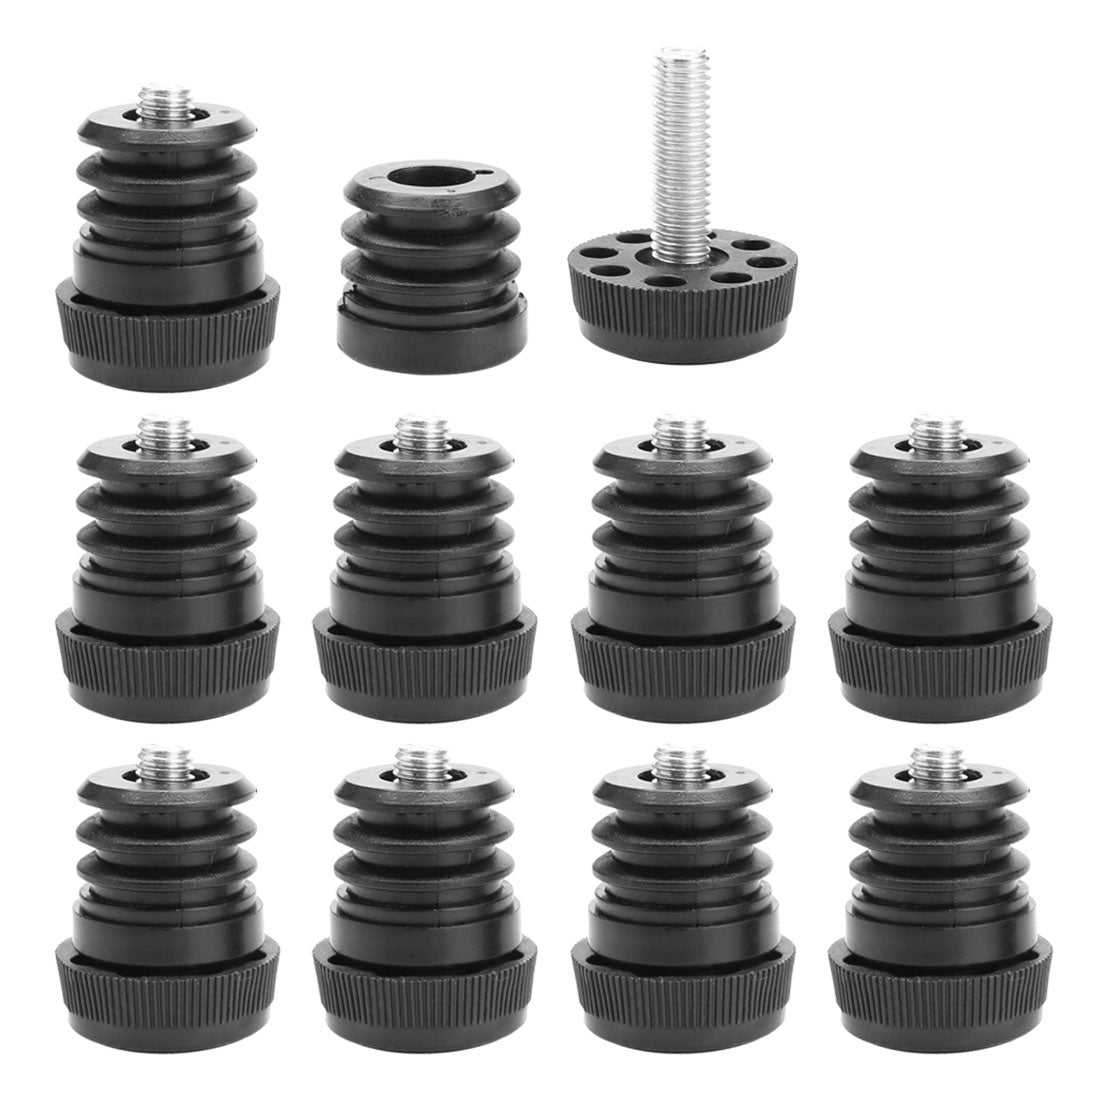 uxcell Uxcell Leveling Feet 1" 25mm OD Round Insert Furniture Adjustable Leveler 10 Sets